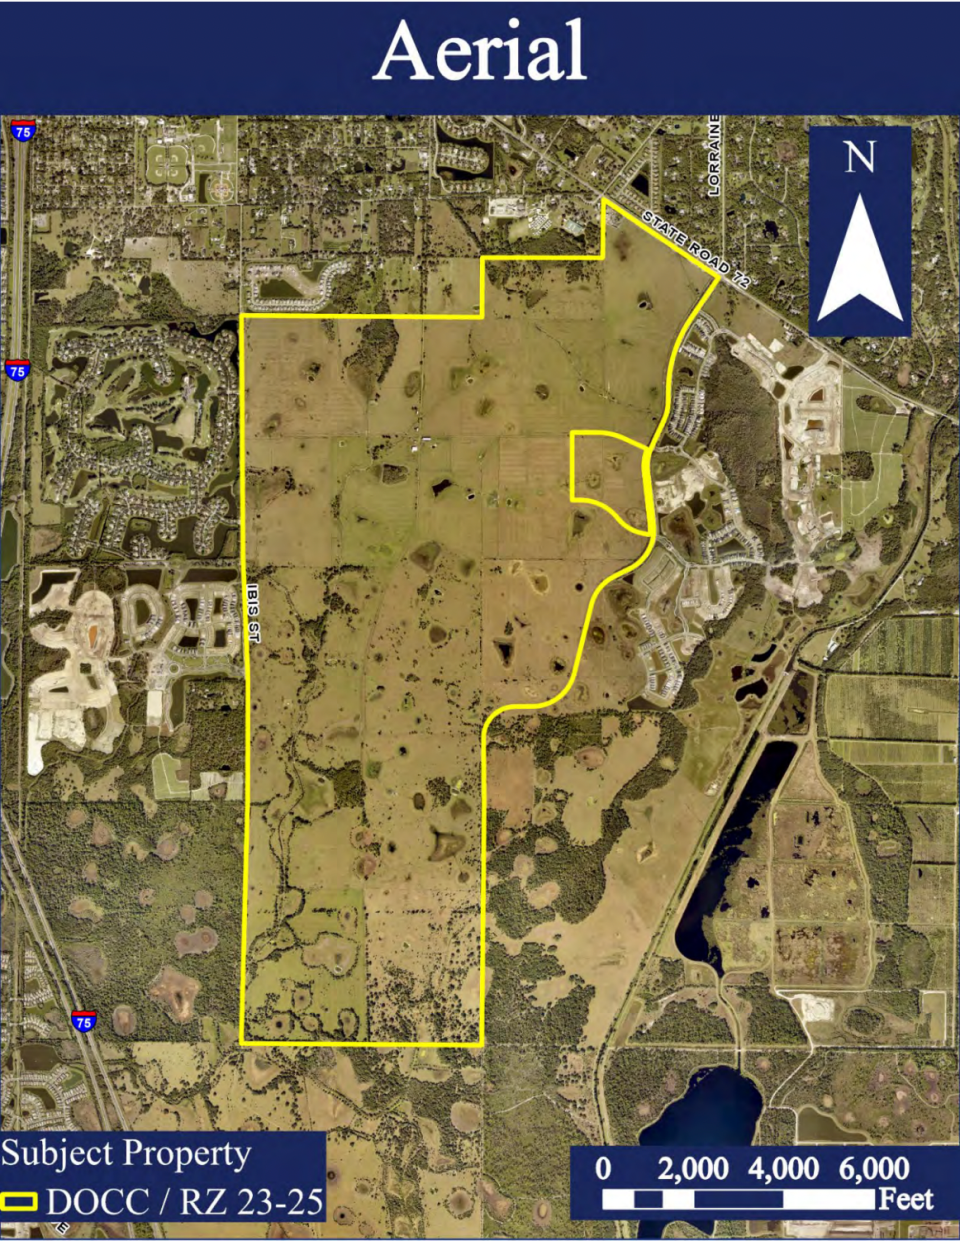 An aerial view of 3H Ranch, which will stretch more than 2,700 acres east of Interstate 75 and south of Clark Road. The master-planned community will contain more than 6,500 residential units and 370,000 square feet of commercial and office space.